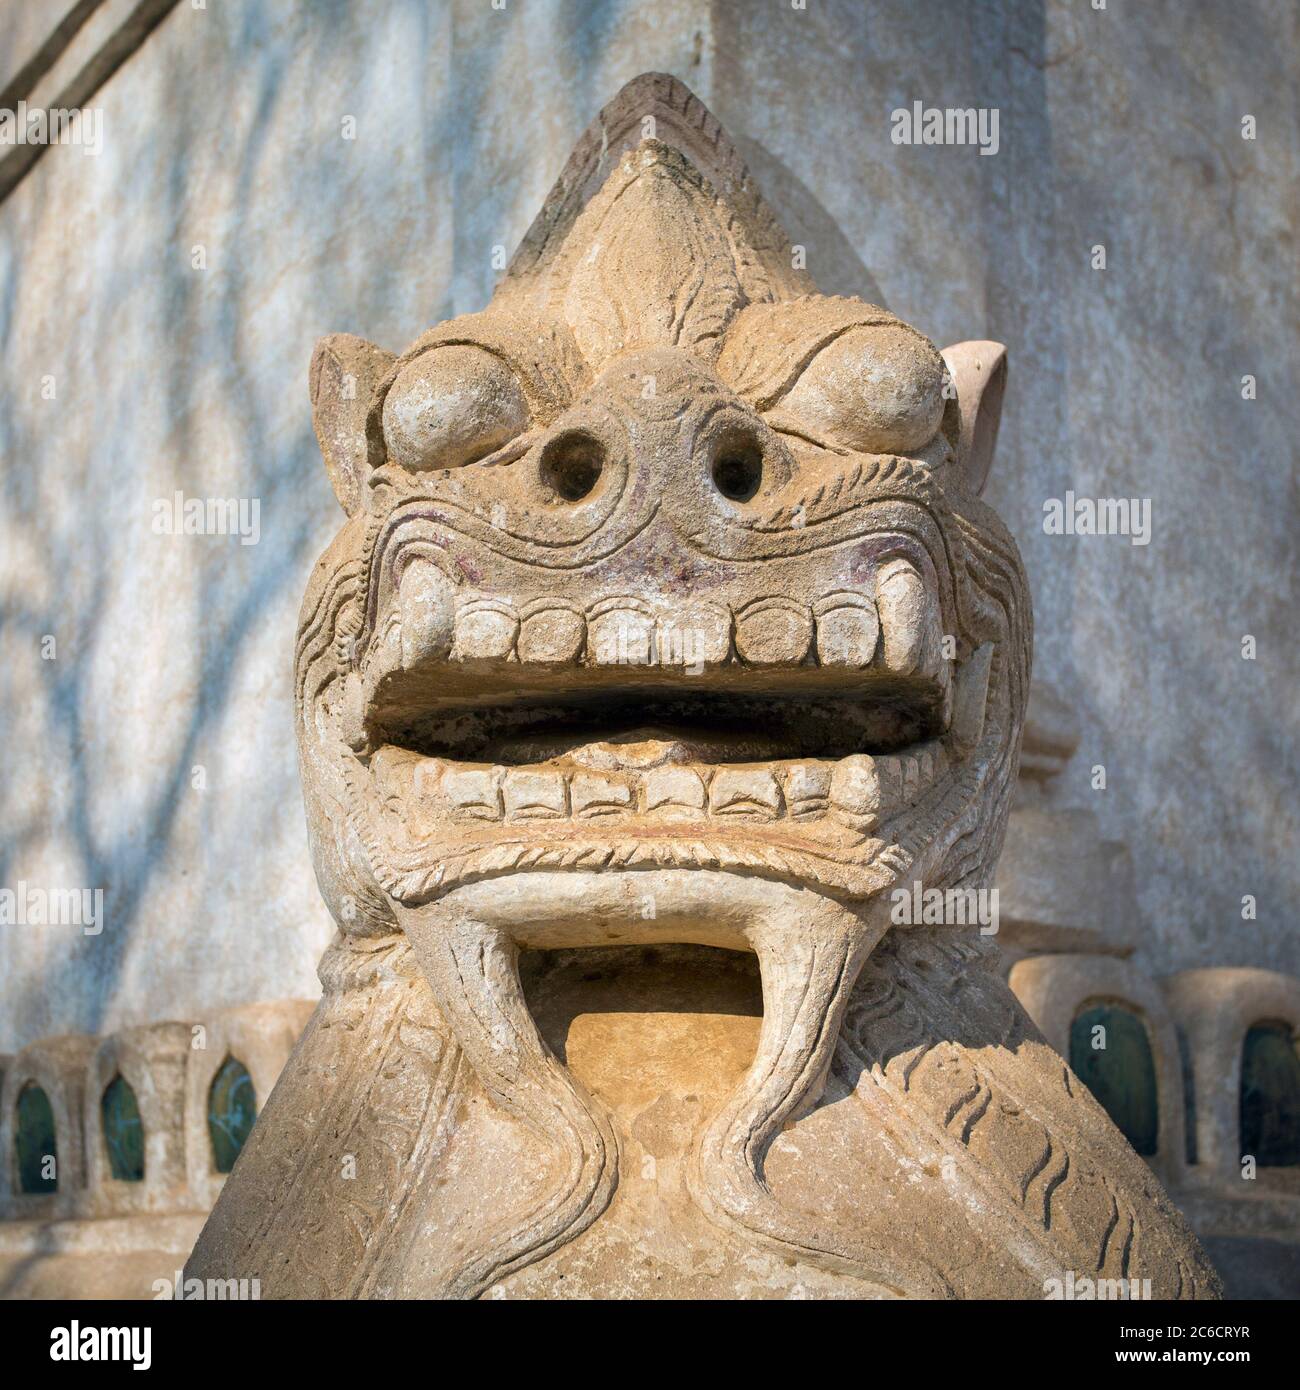 A close-up view of a carved stone statue of a chinthe (lion) at the Ananda Buddhist Temple in Yangon, Myanmar Stock Photo